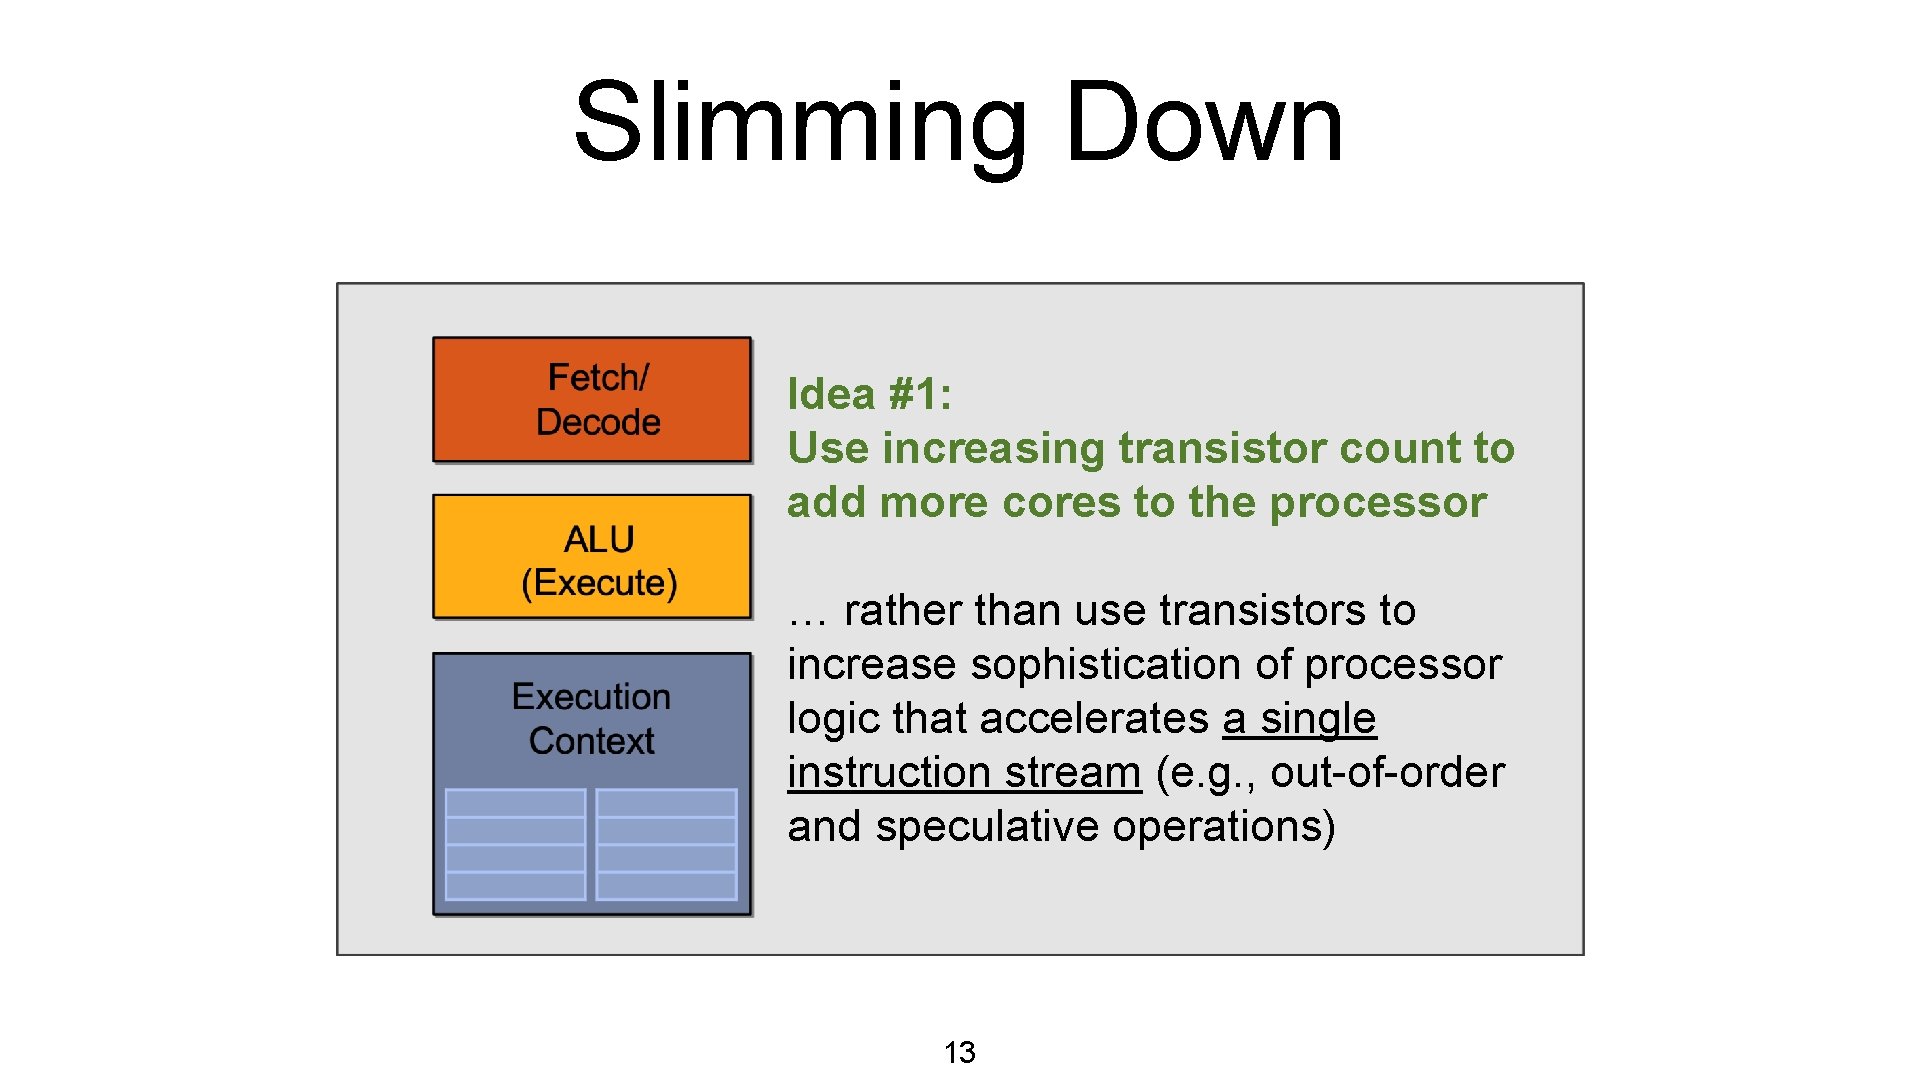 Slimming Down Idea #1: Use increasing transistor count to add more cores to the